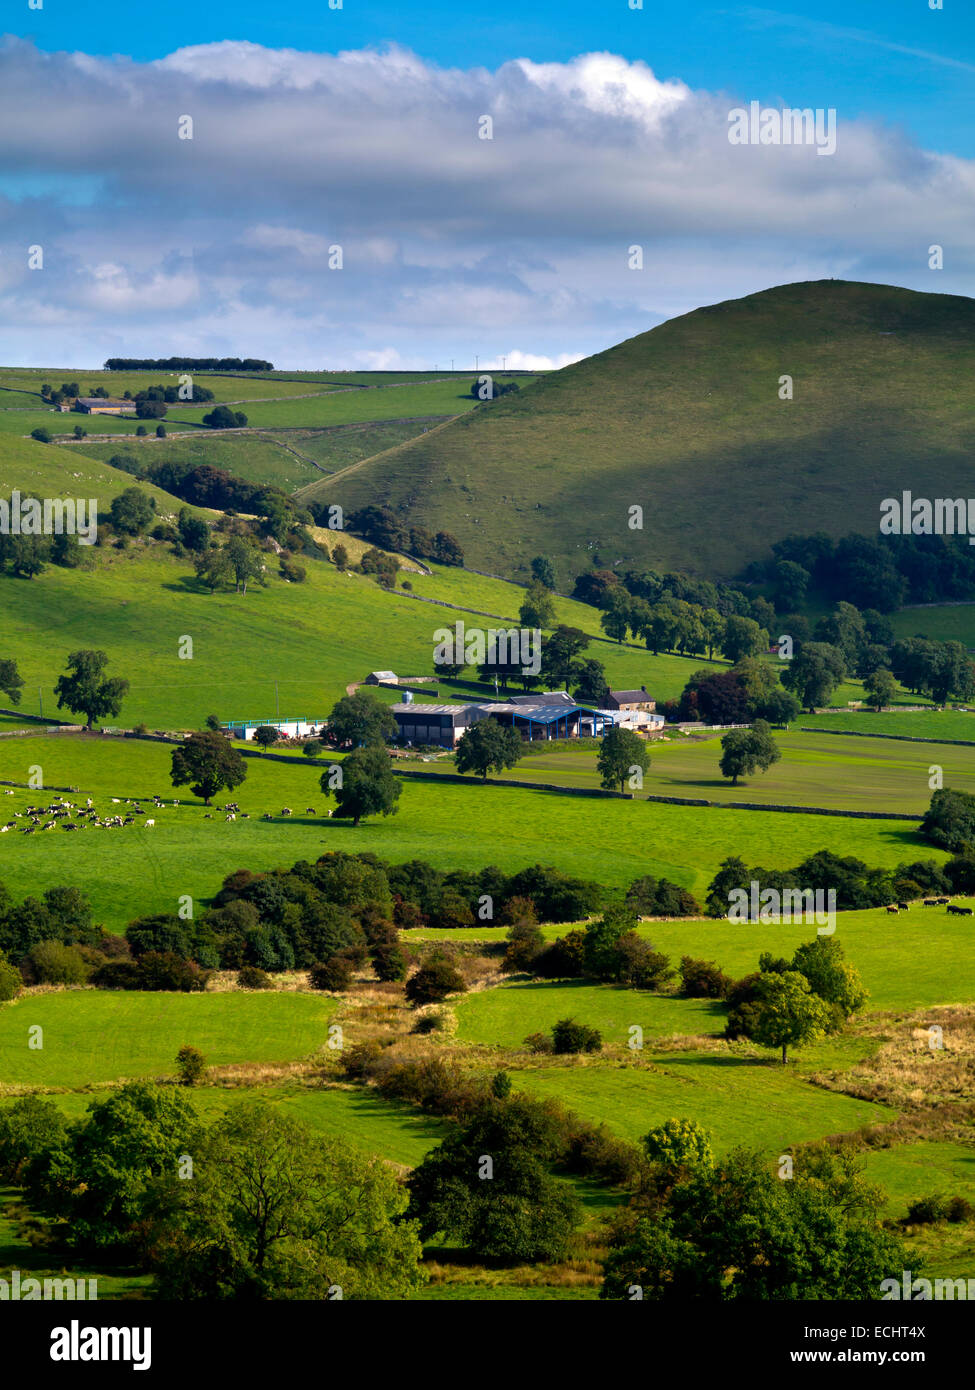 Upland hill farm in countryside near Longnor in the Staffordshire Moorlands area of the Peak District National Park England UK Stock Photo